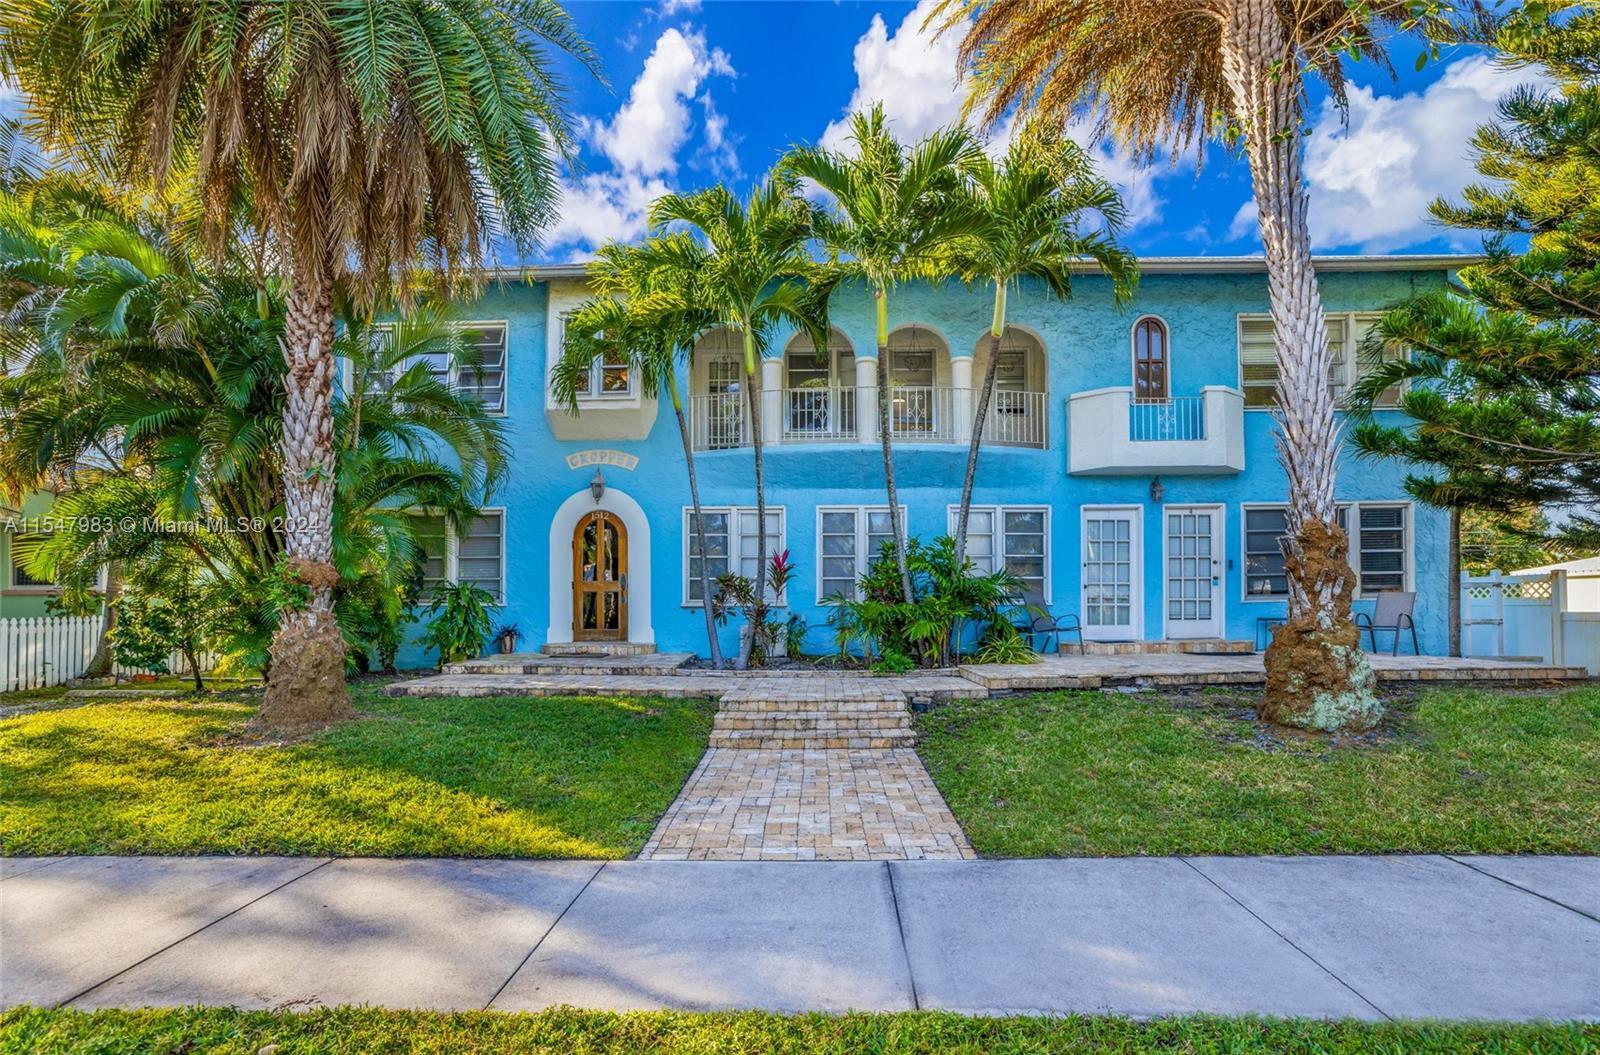 Photo of 1512 Harrison St in Hollywood, FL